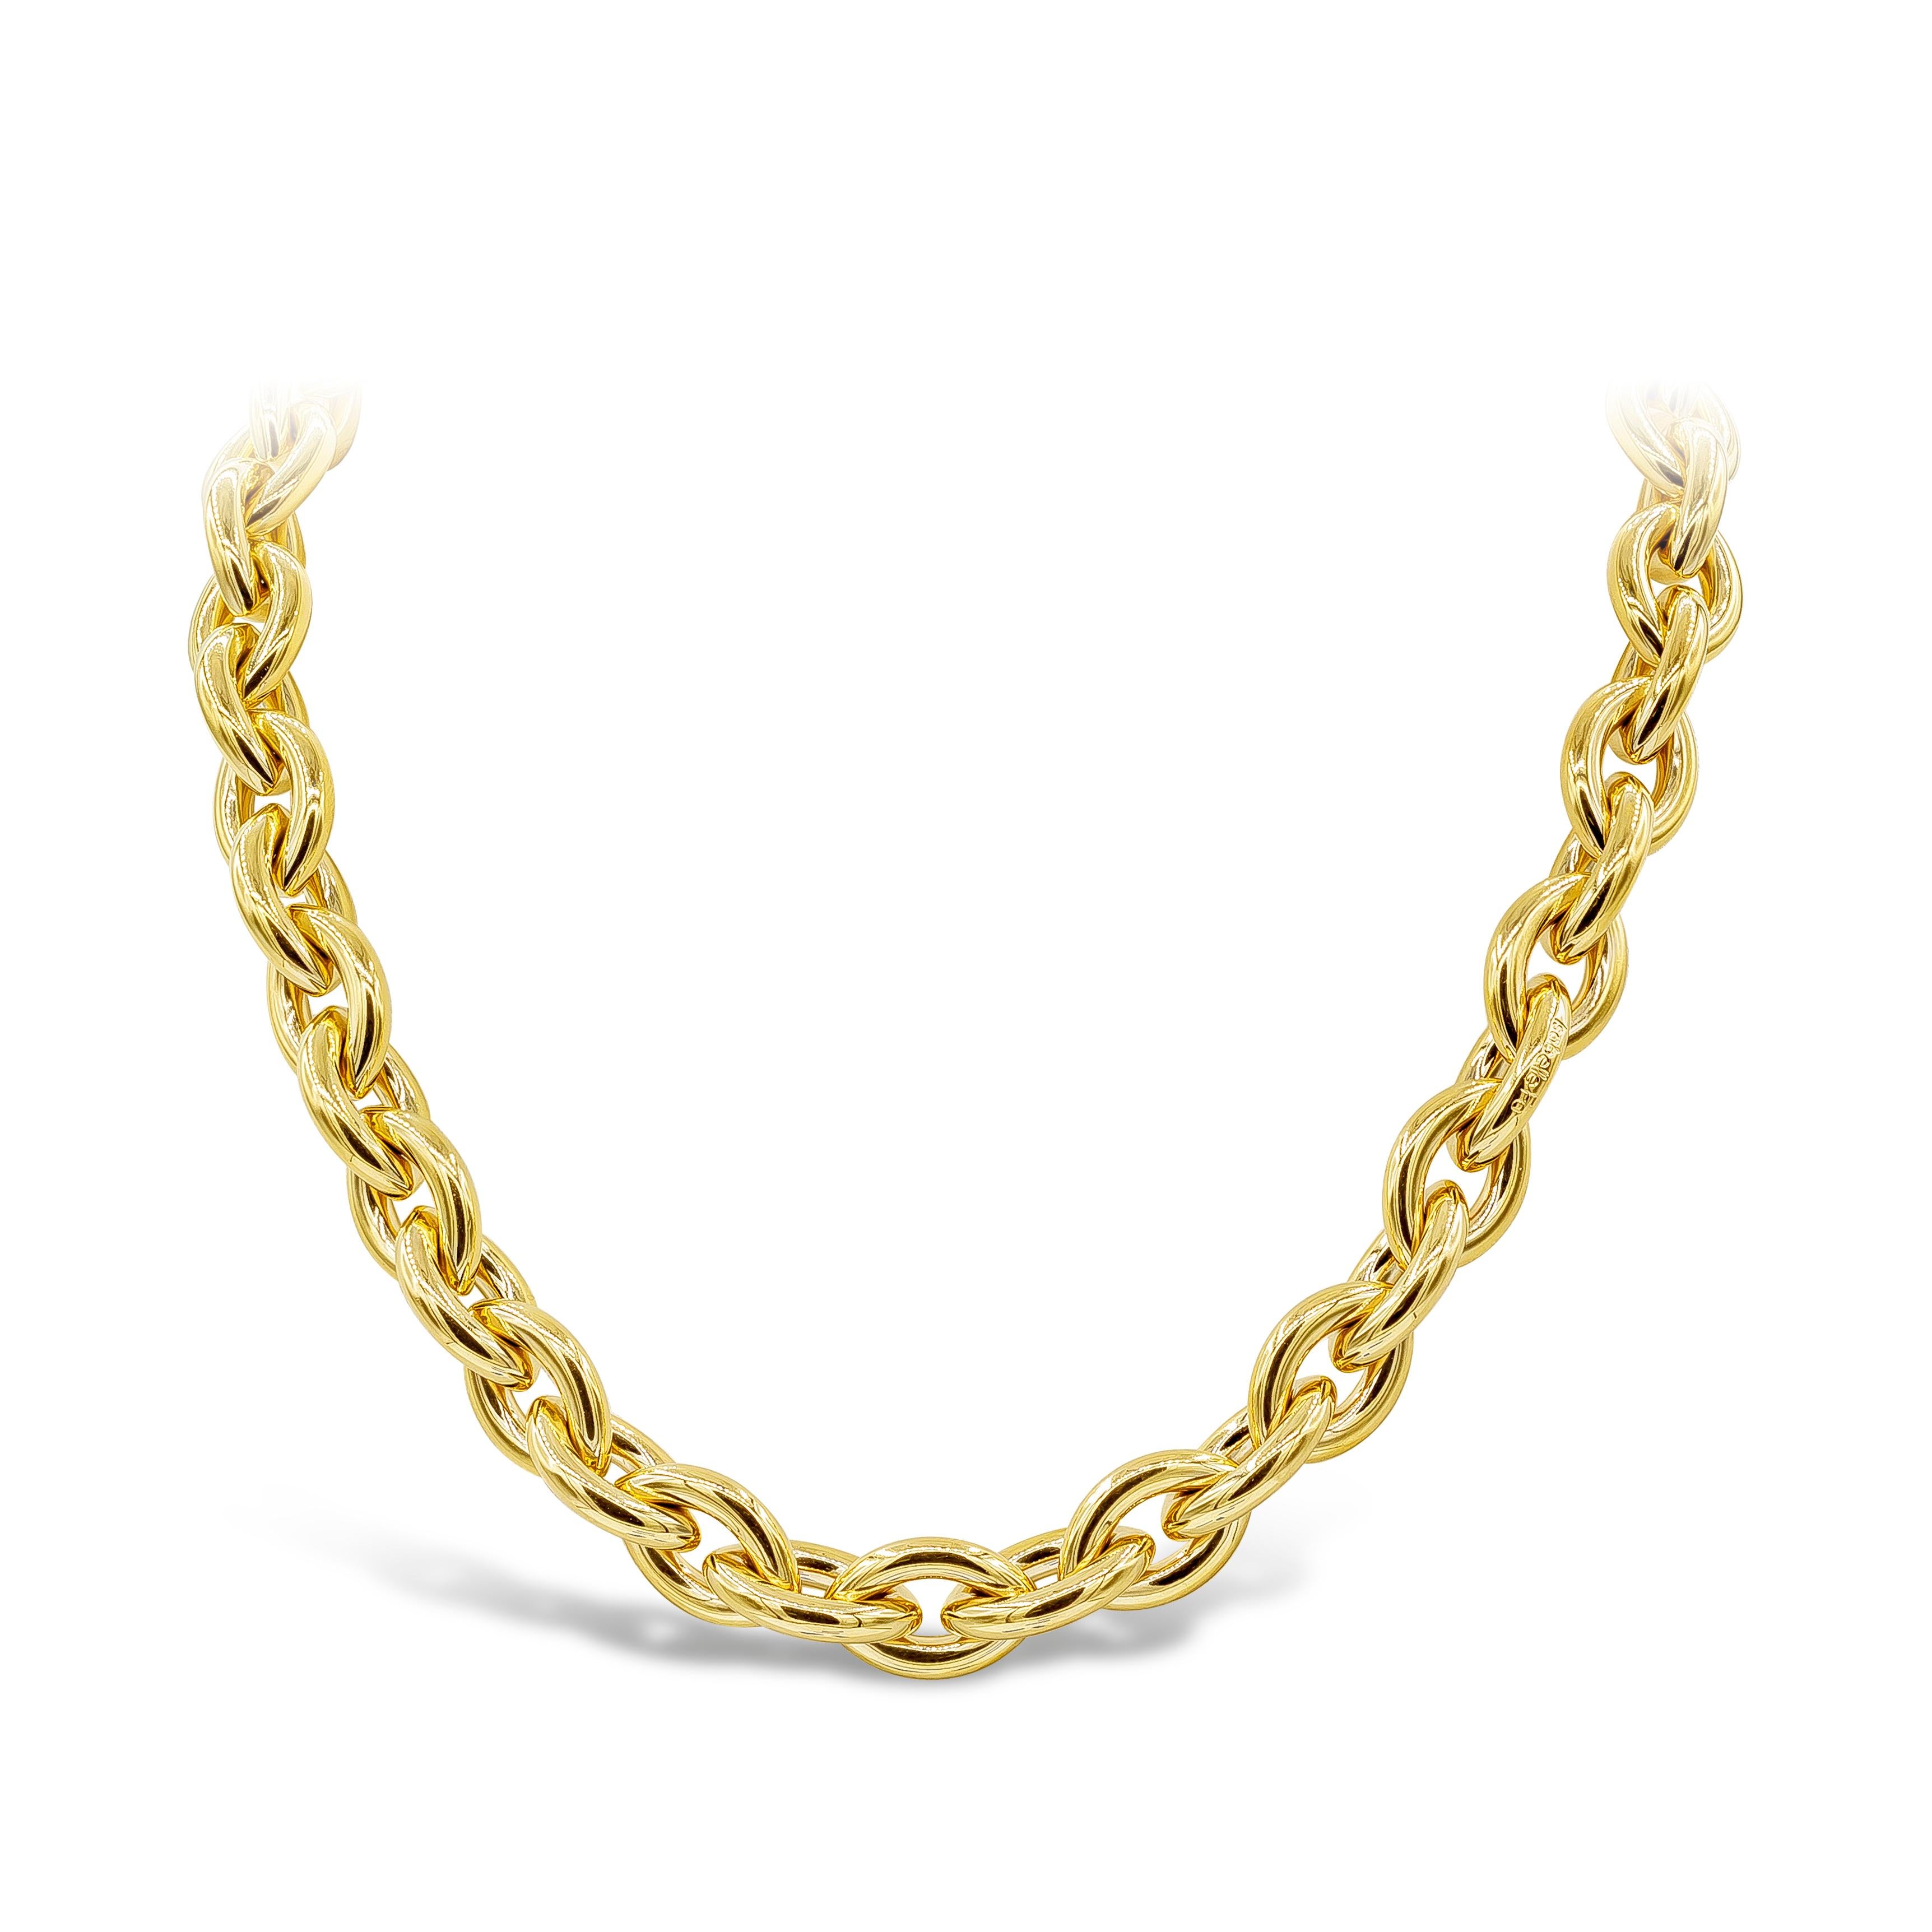 A classic chain necklace made with 18K Yellow Gold. One link is made in platinum and micro-pave set in round brilliant diamonds. Diamonds weigh 0.83 carats total. Weighs 91.85 grams. Made and signed by Isabelle Fa.

Length is 17.25 inches